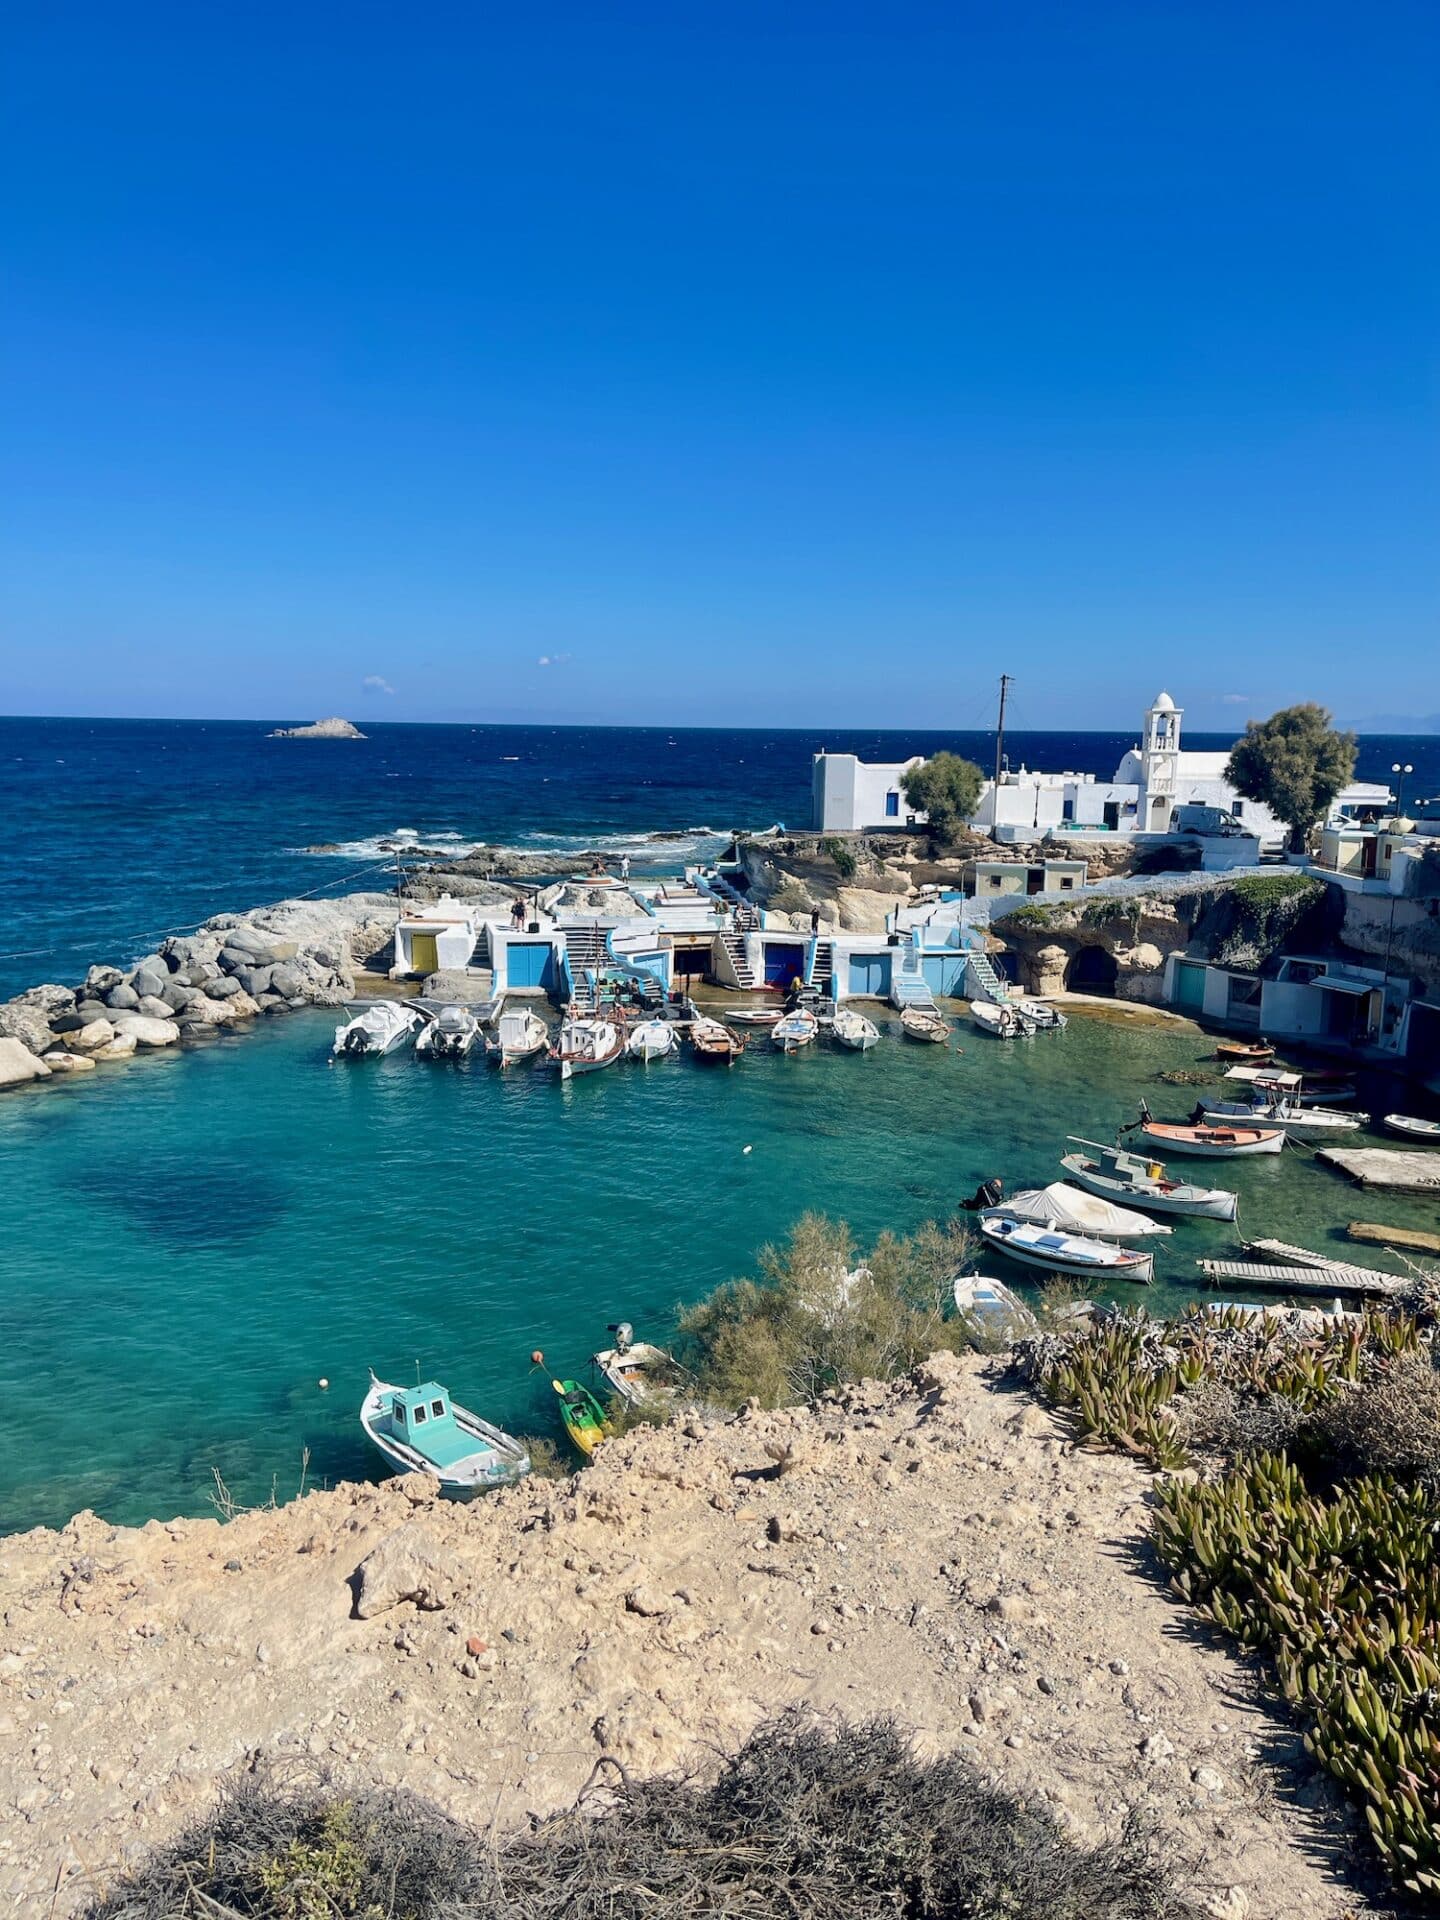 Quaint coastal village with traditional white buildings and a small boat harbor, set against a vivid blue sea and clear sky.